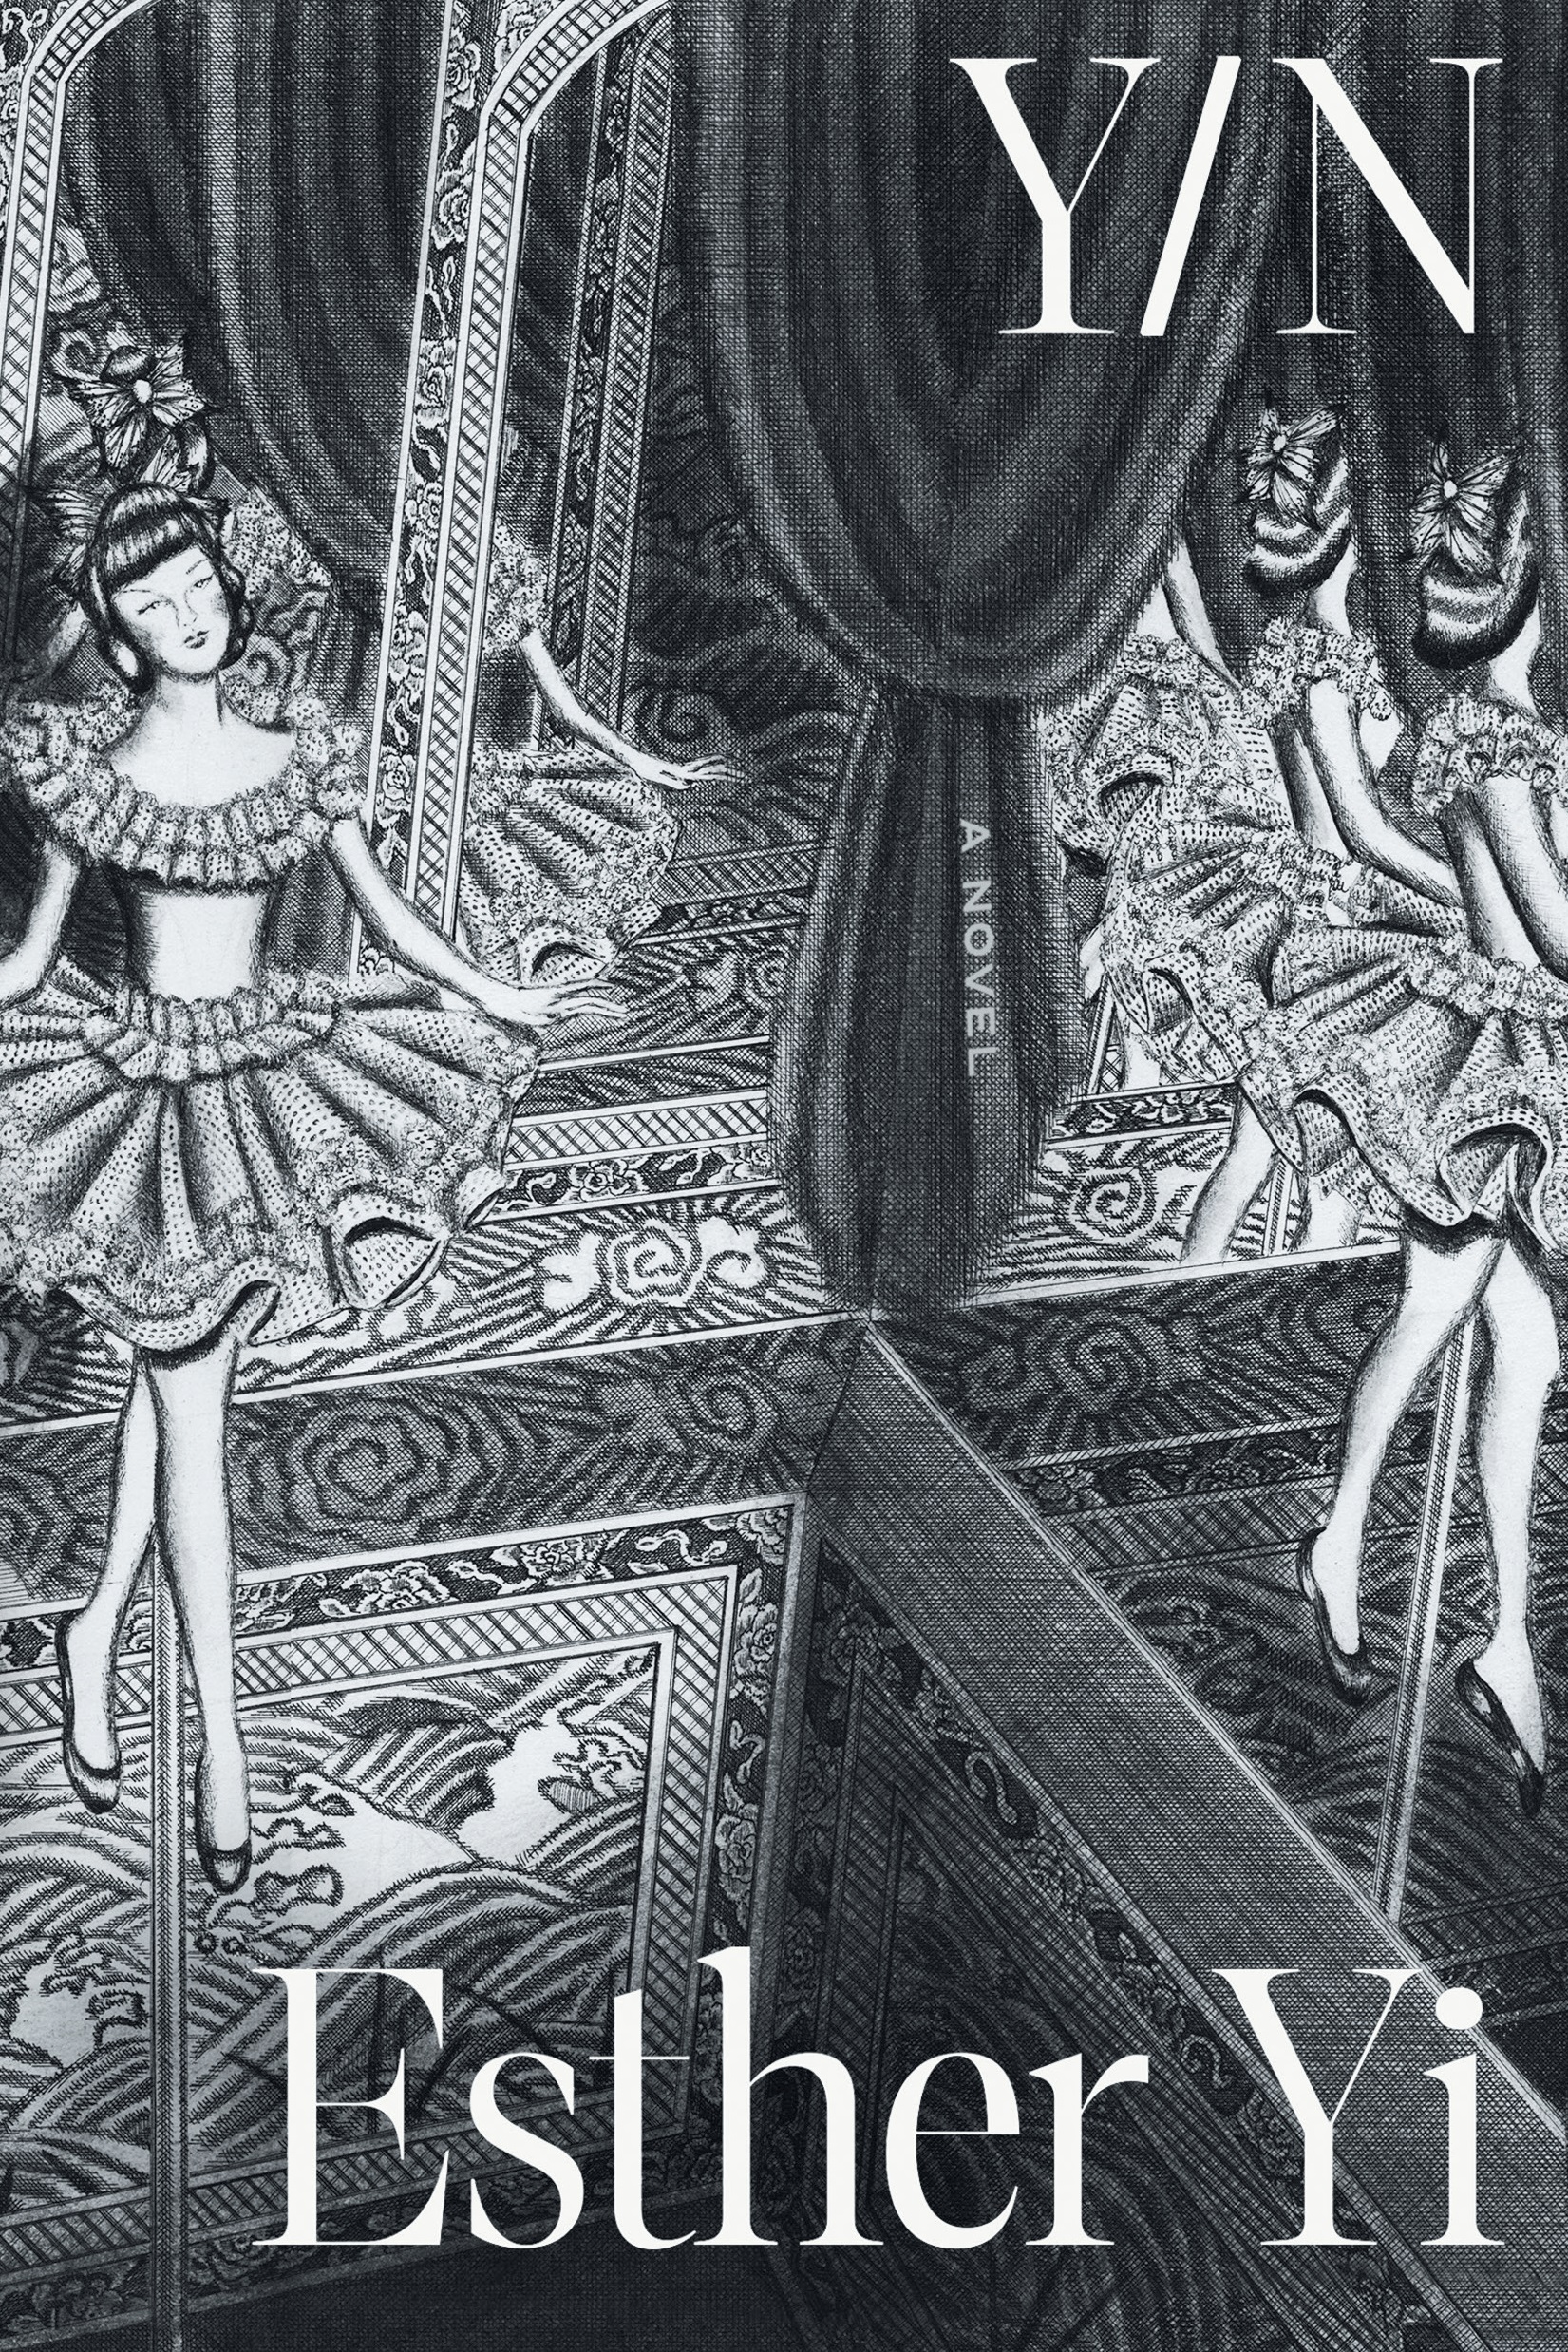 A book cover showing a black and white illustration of women dancing on a stage